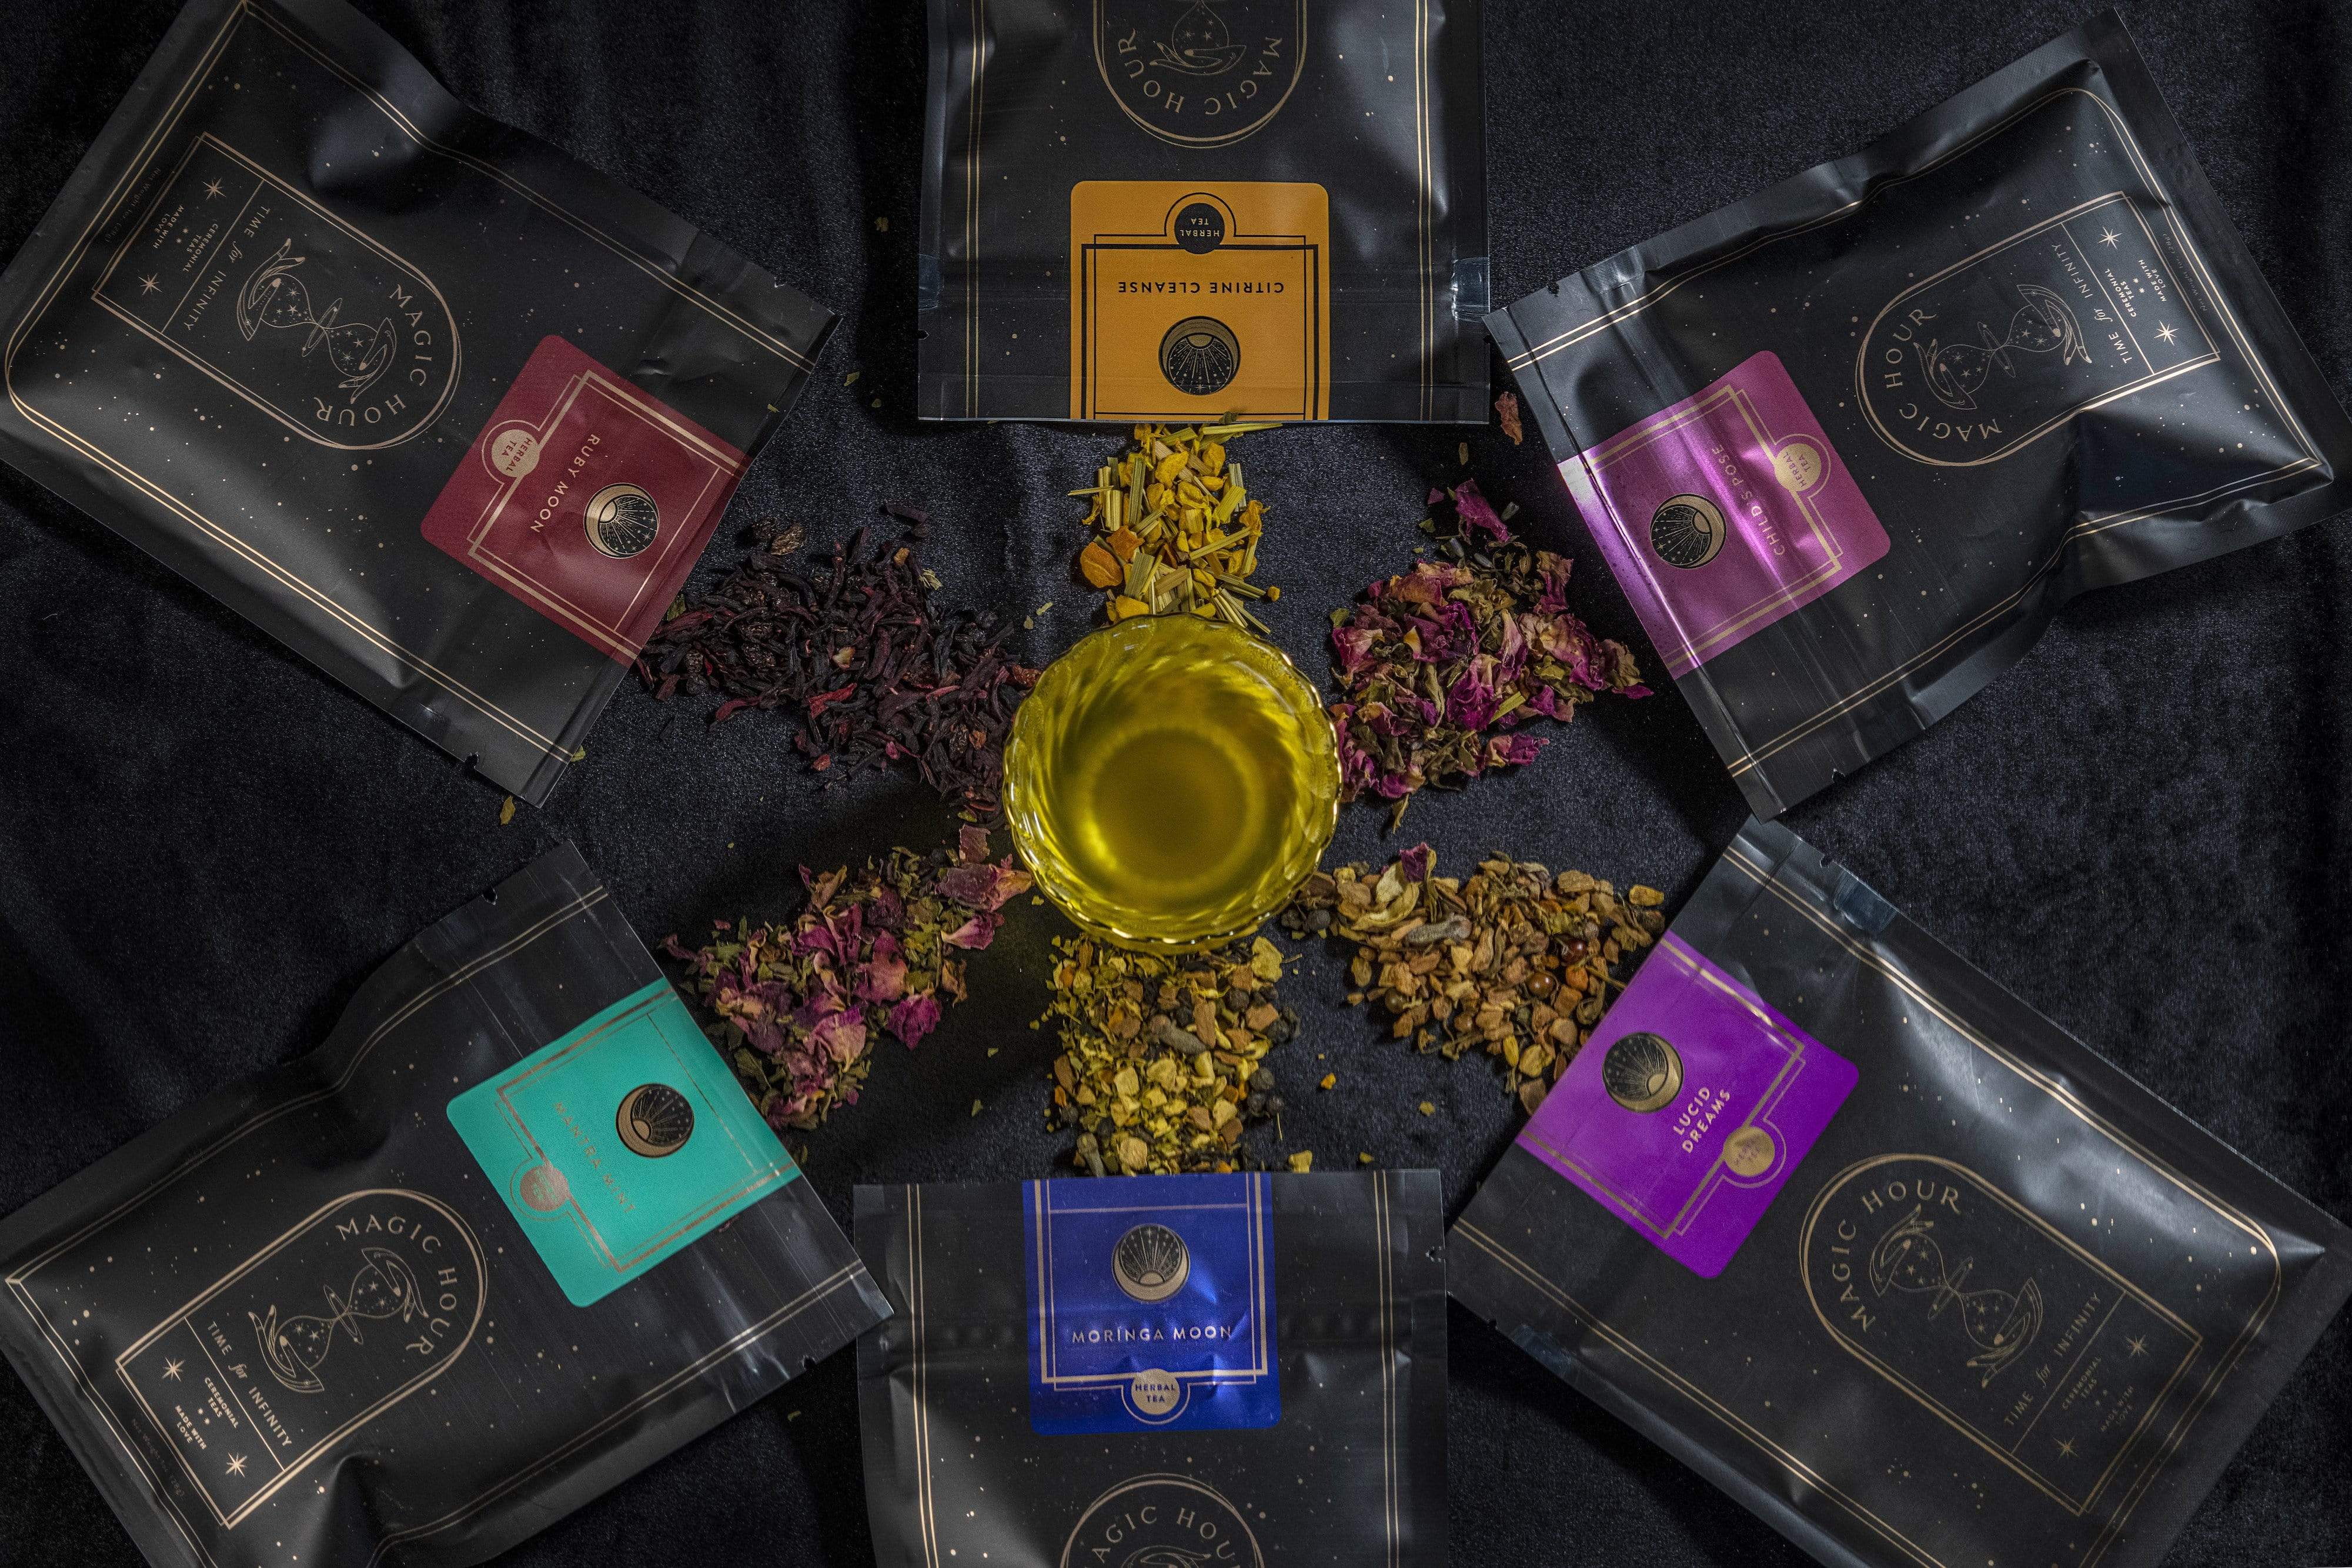 Self-Guided 8 Day Ceremonial Tea Cleanse Kit